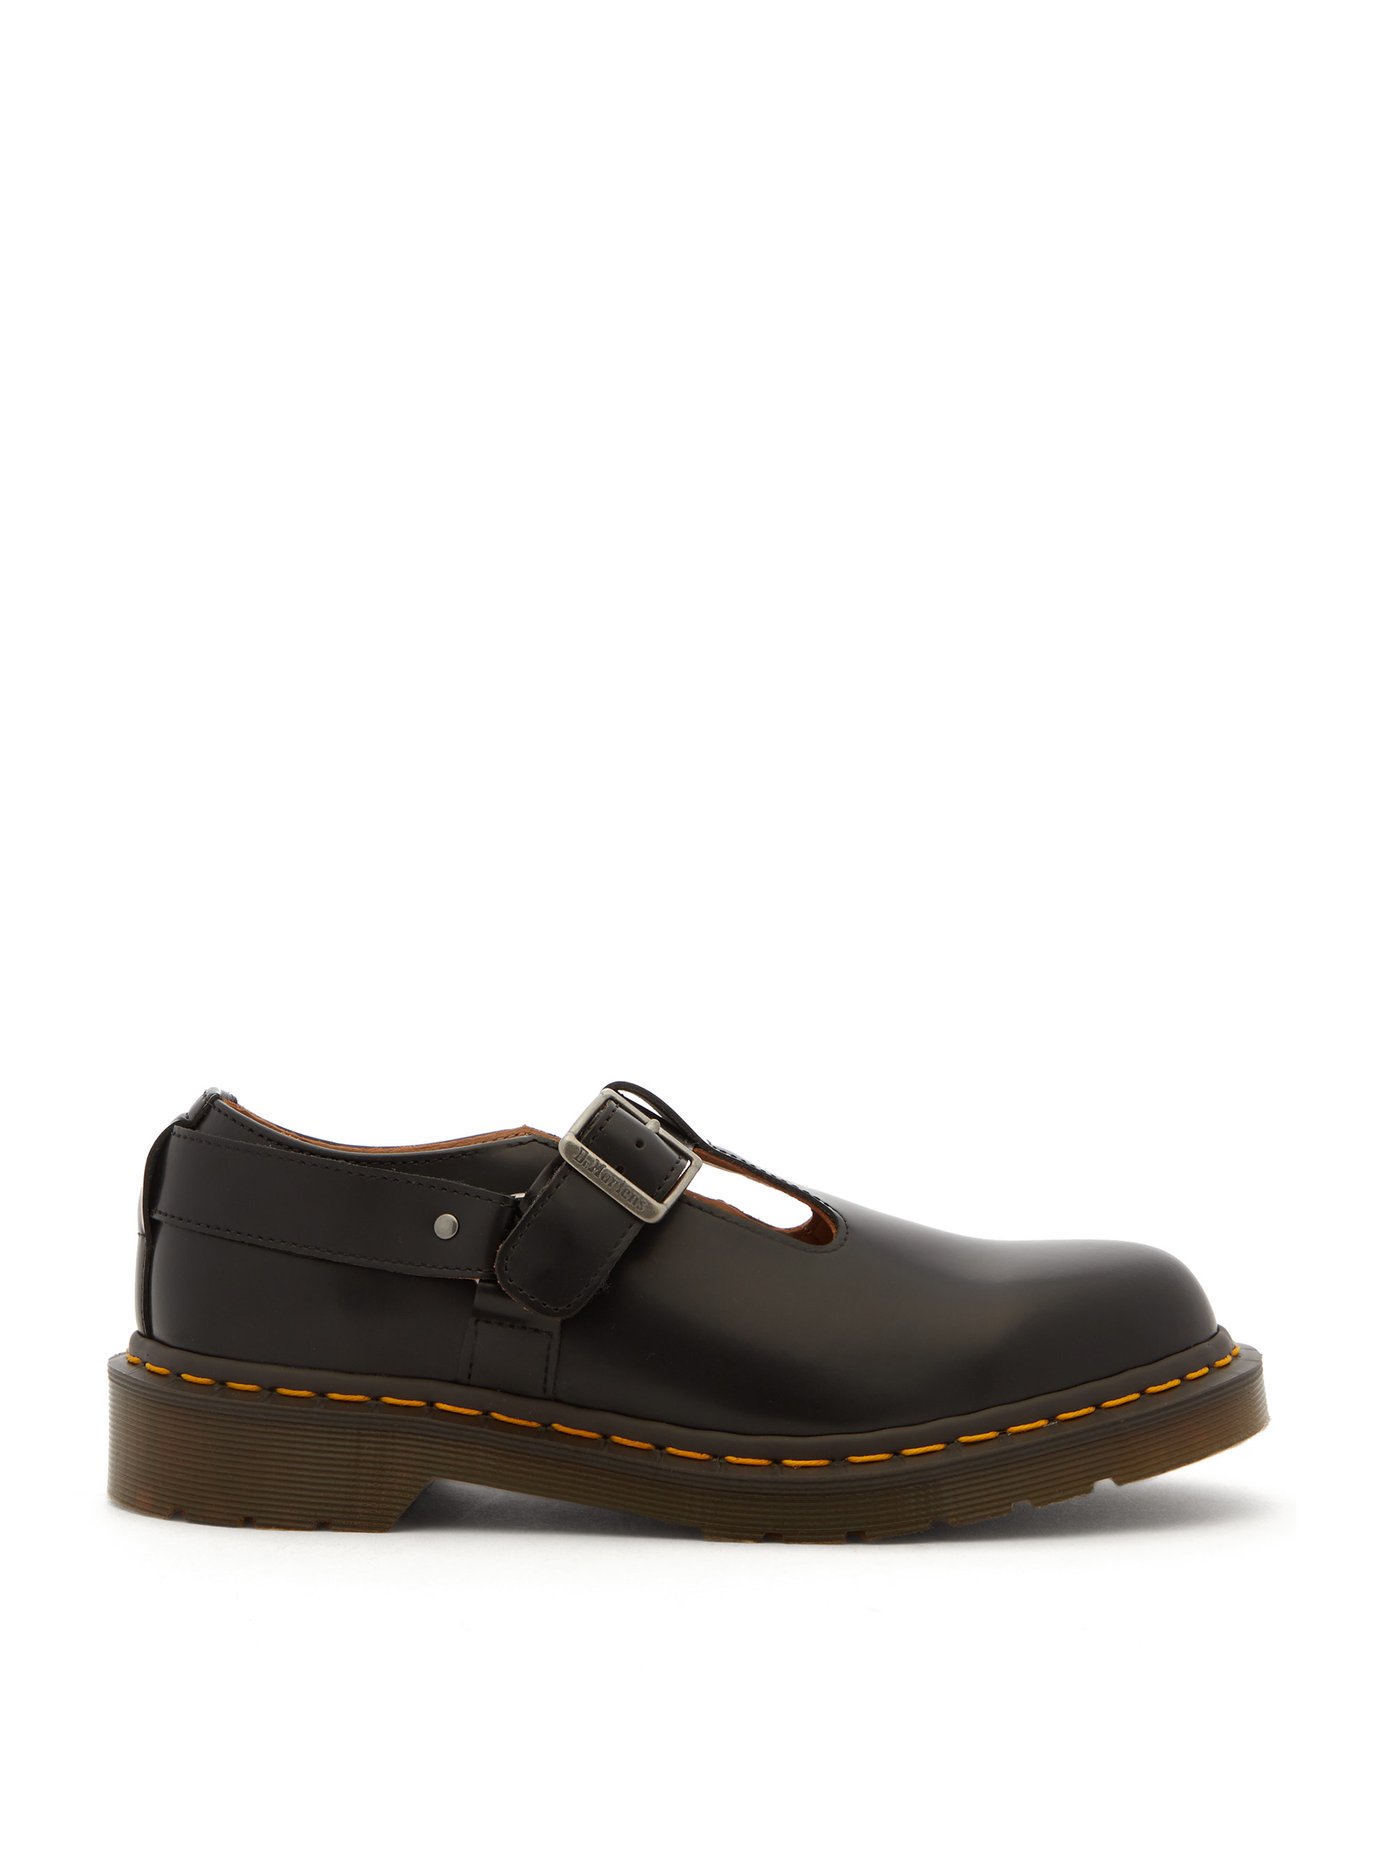 X Dr Martens Polley T-bar leather shoes 